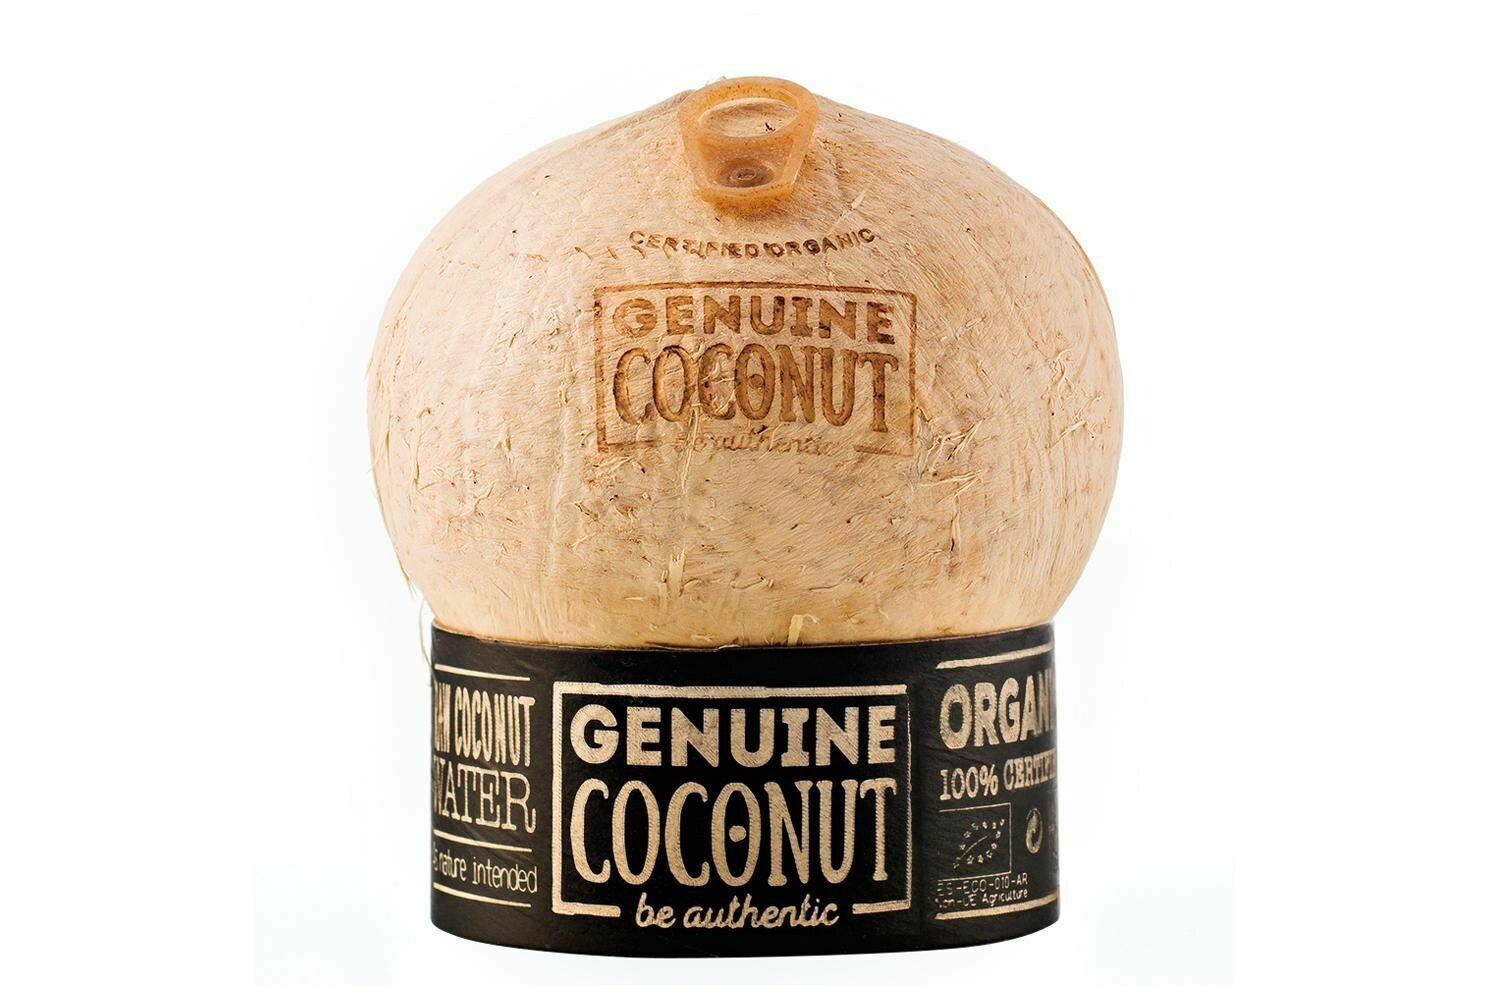 2 x Coconut - organic young coconut with ring pull